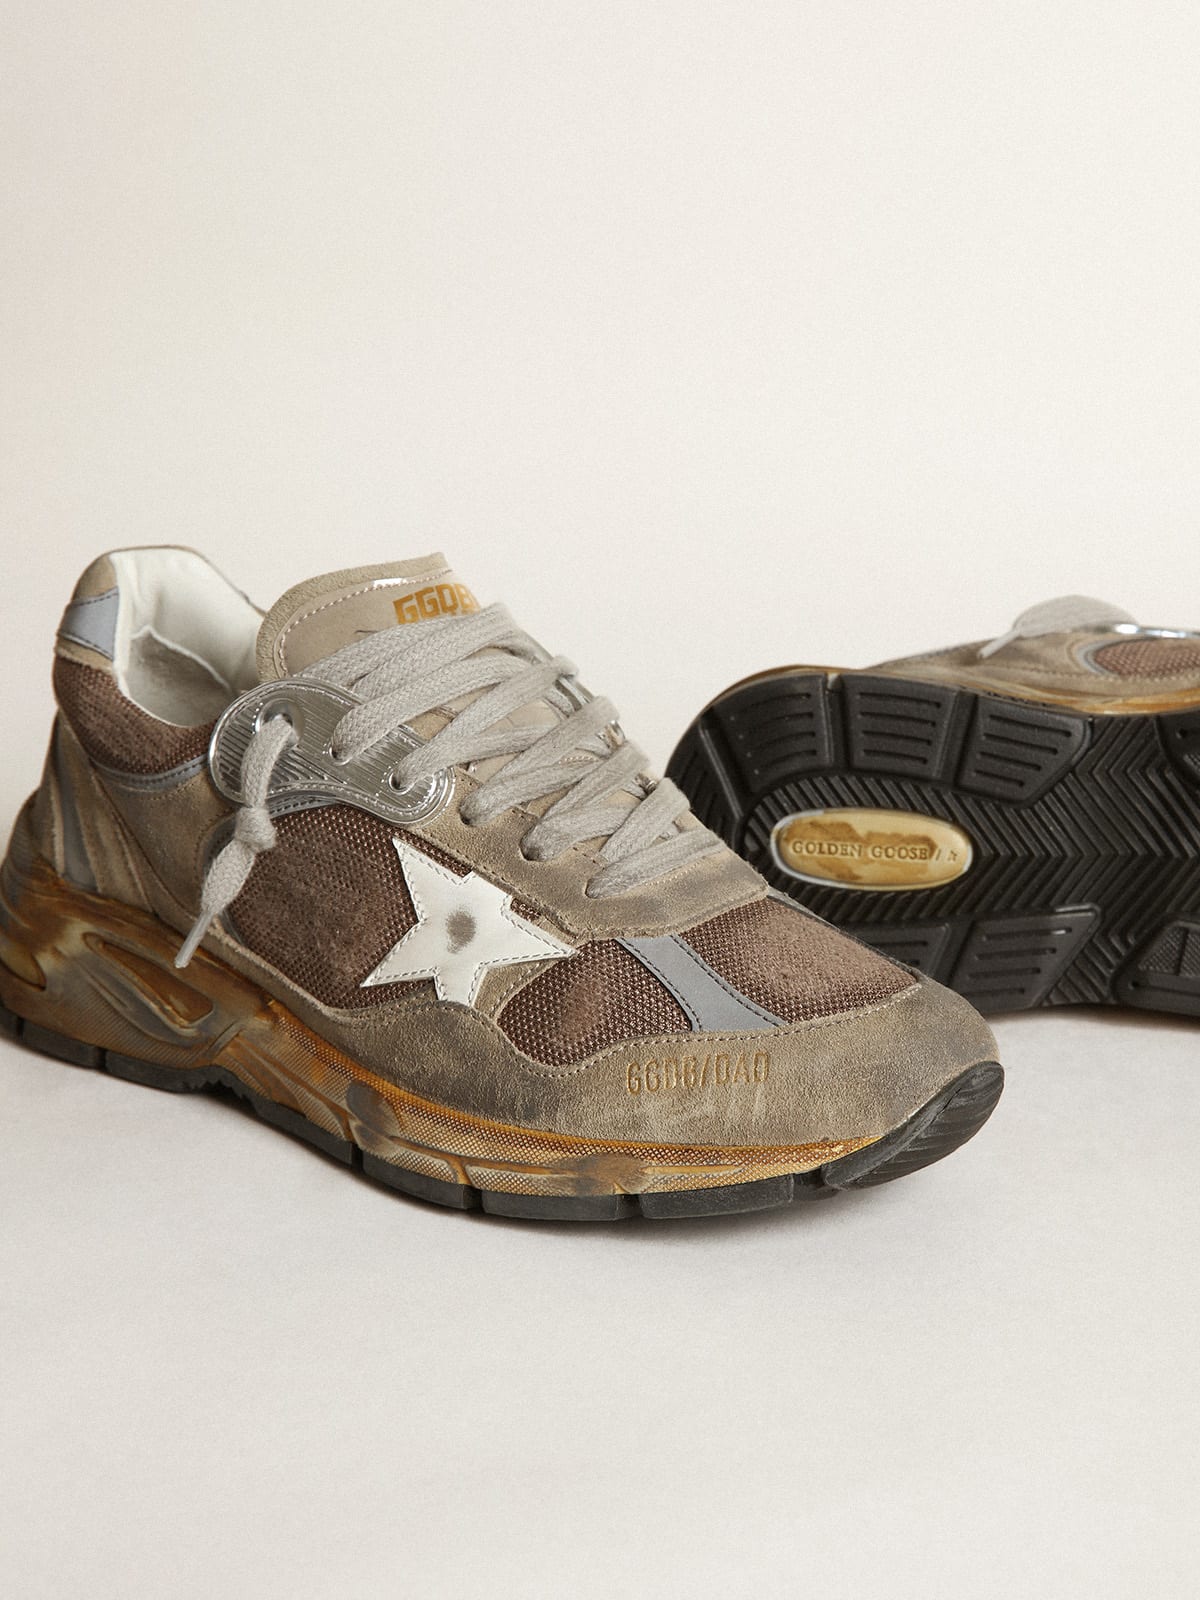 Golden Goose - Men’s Dad-Star sneakers in dove-gray mesh and suede with white leather star in 